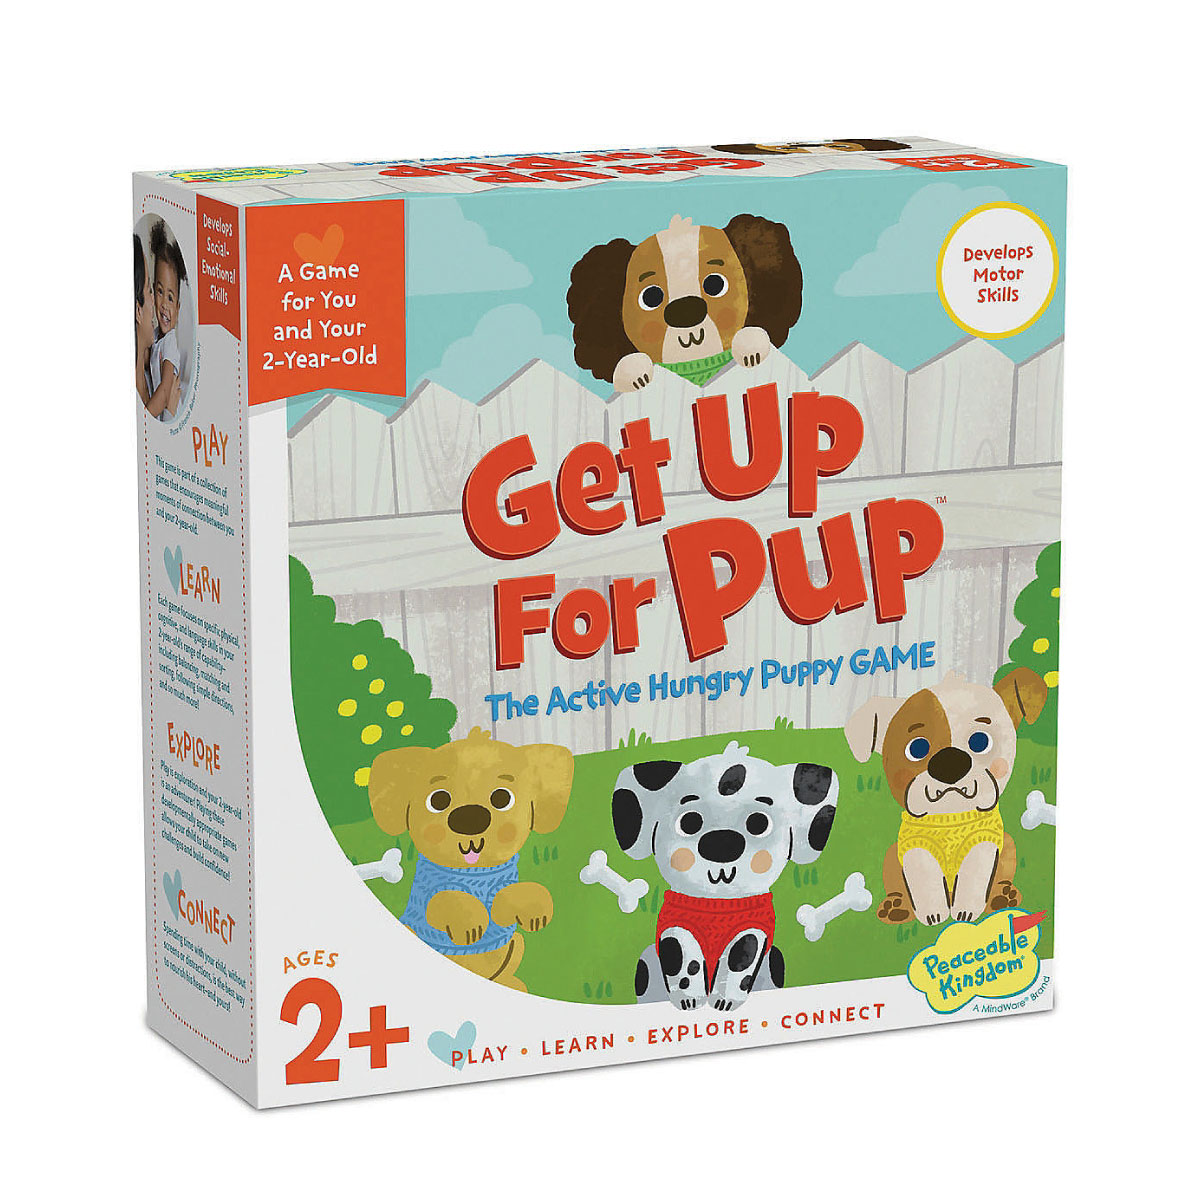 Get up For Pup! from Peaceable Kingdom